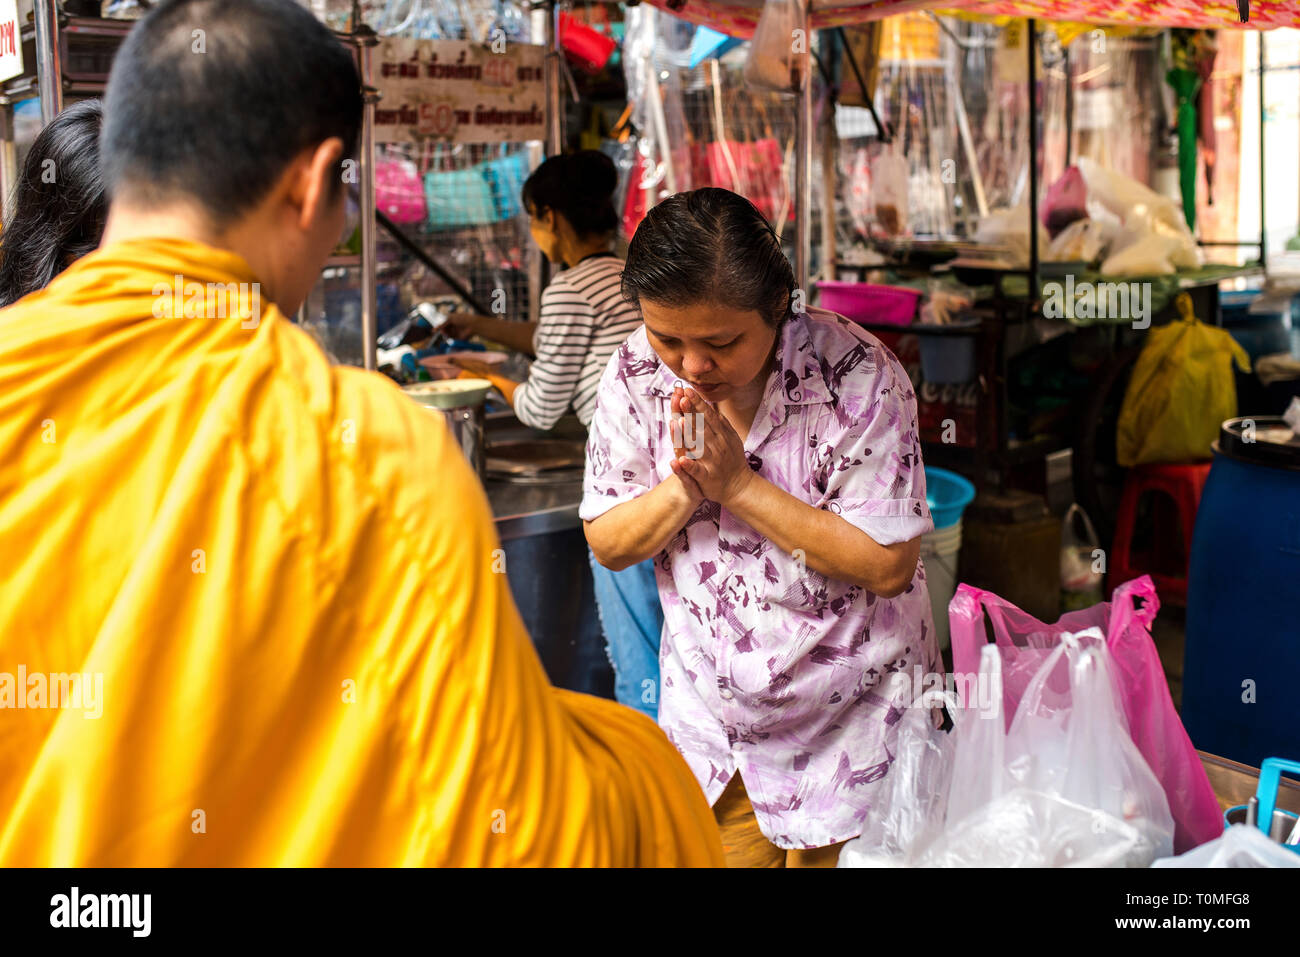 Woman in prayer position in front of a monk, market in Chinatown, Bangkok,Thailand Stock Photo